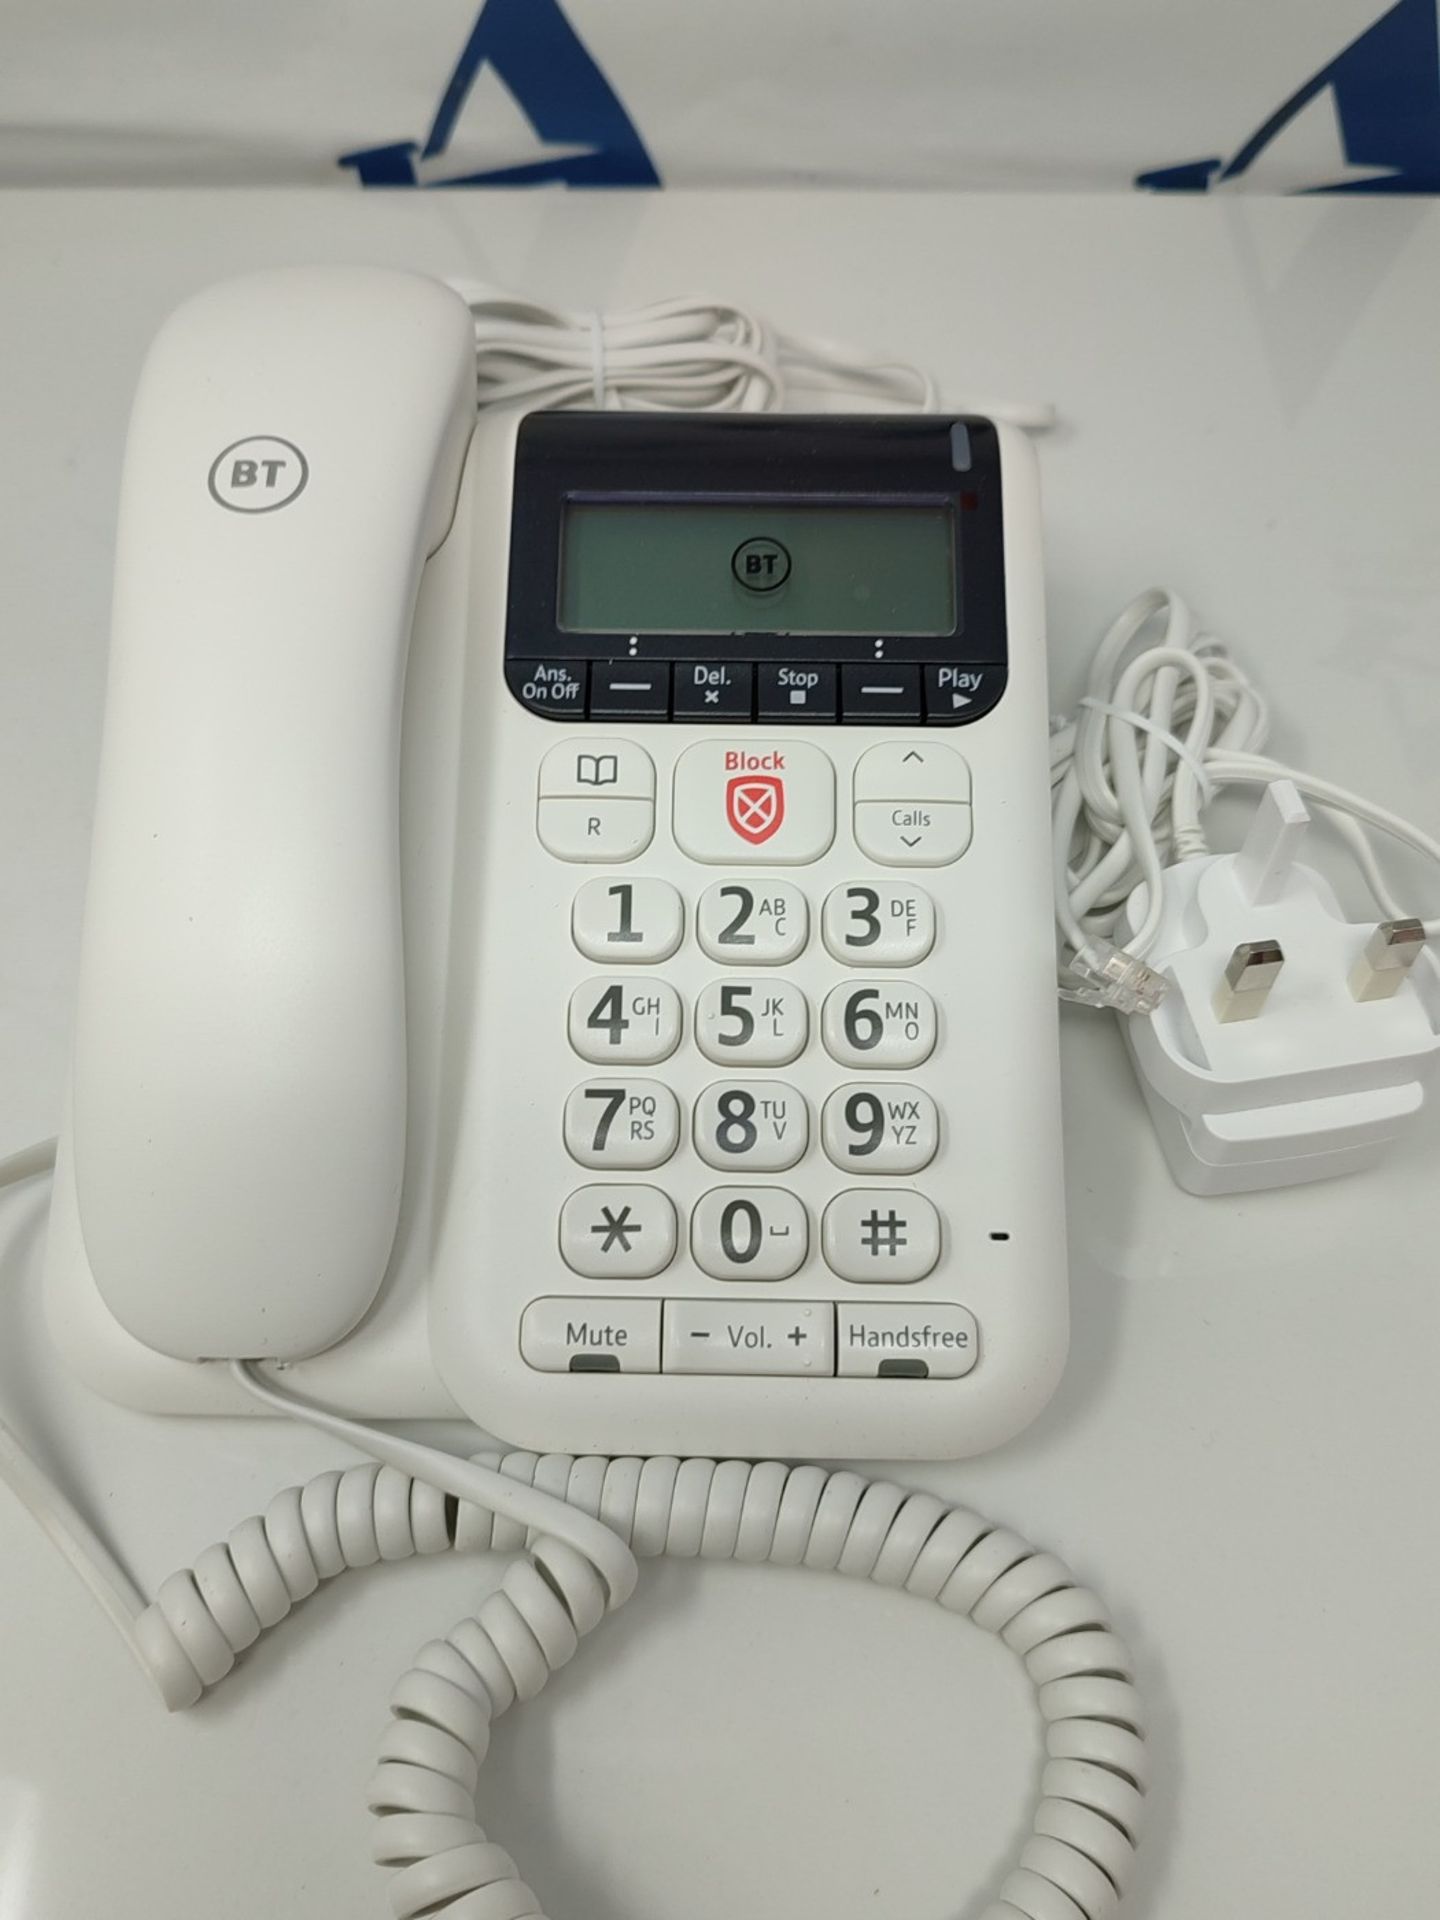 BT Décor 2600 Corded Landline House Phone with Advanced Nuisance Call Blocker - Image 2 of 2